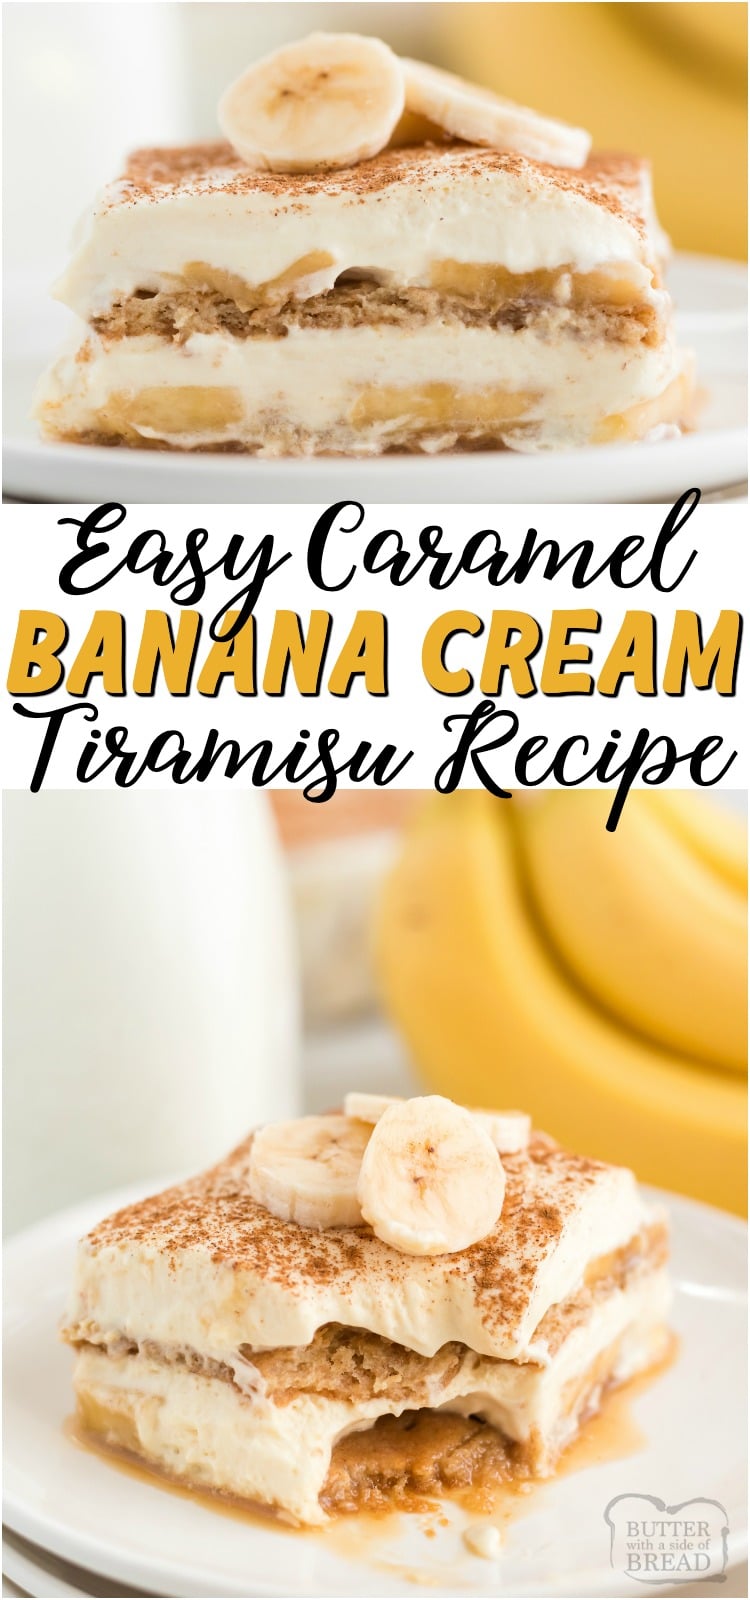 Easy recipe for Caramel Banana Cream Tiramisu that uses graham crackers and a pudding-caramel mixture in layers. Comes together so fast & is delicious! #banana #caramel #tiramisu #layered #dessert #icebox #recipe from BUTTER WITH A SIDE OF BREAD